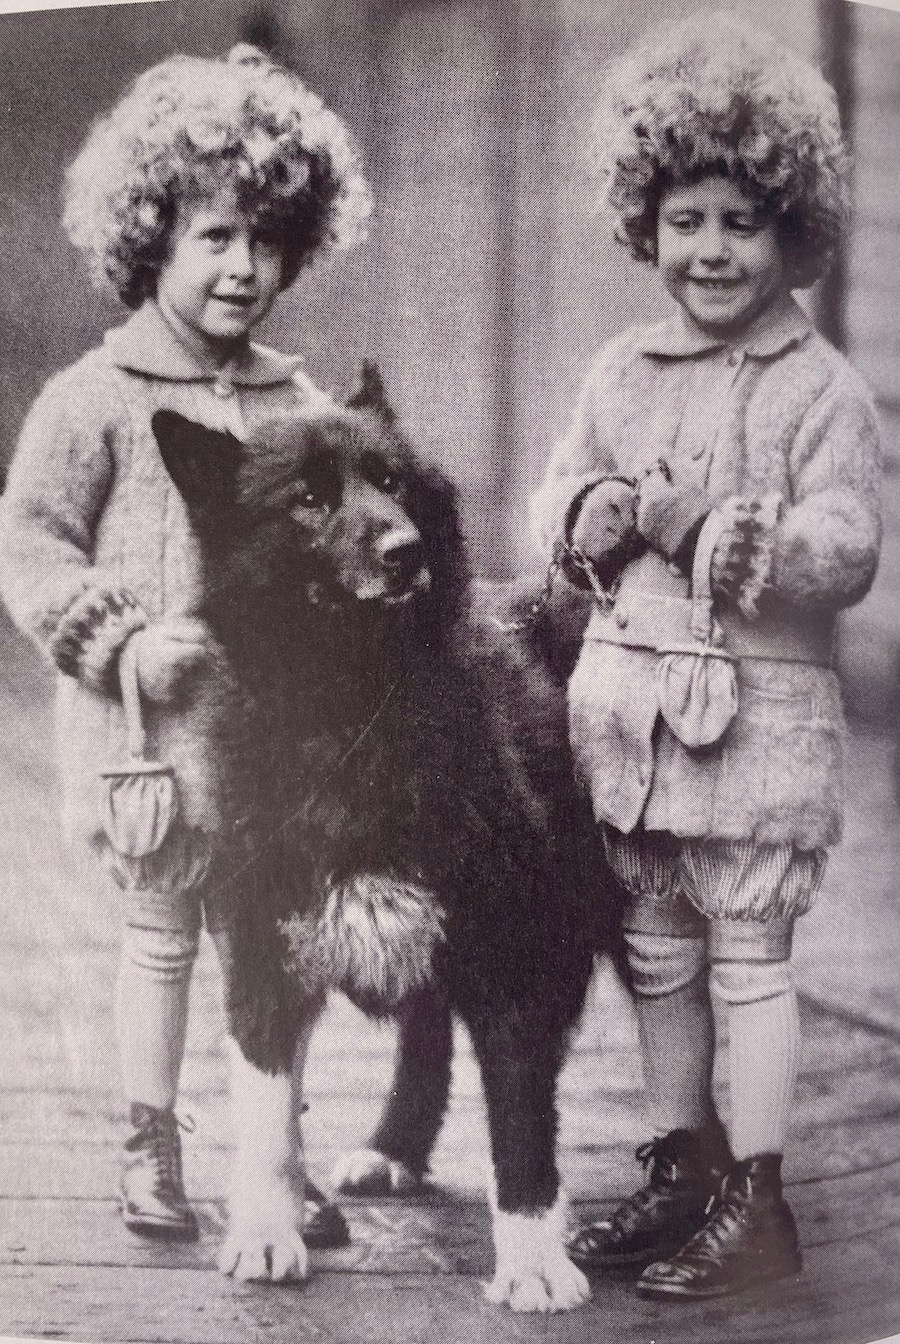 A husky-breed dog stands between twins with long curly blond hair.